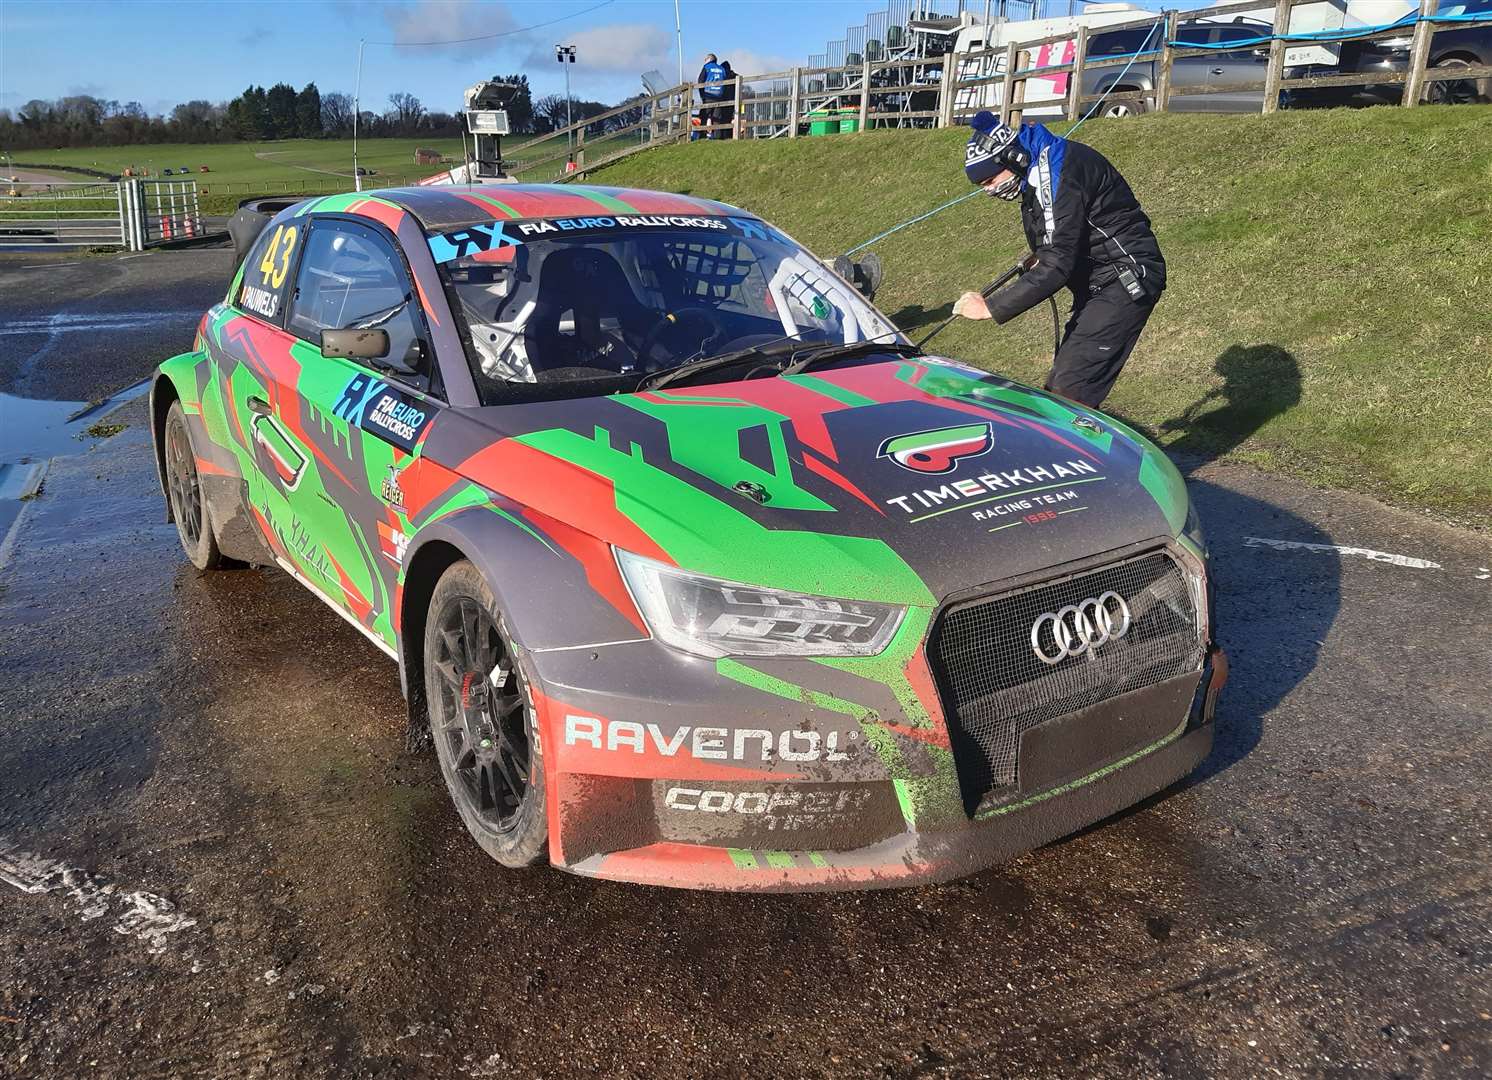 ... Now his son Kobe - who turned 16 this year - has made his Lydden debut driving a Volland Racing-run Super 1600 Audi